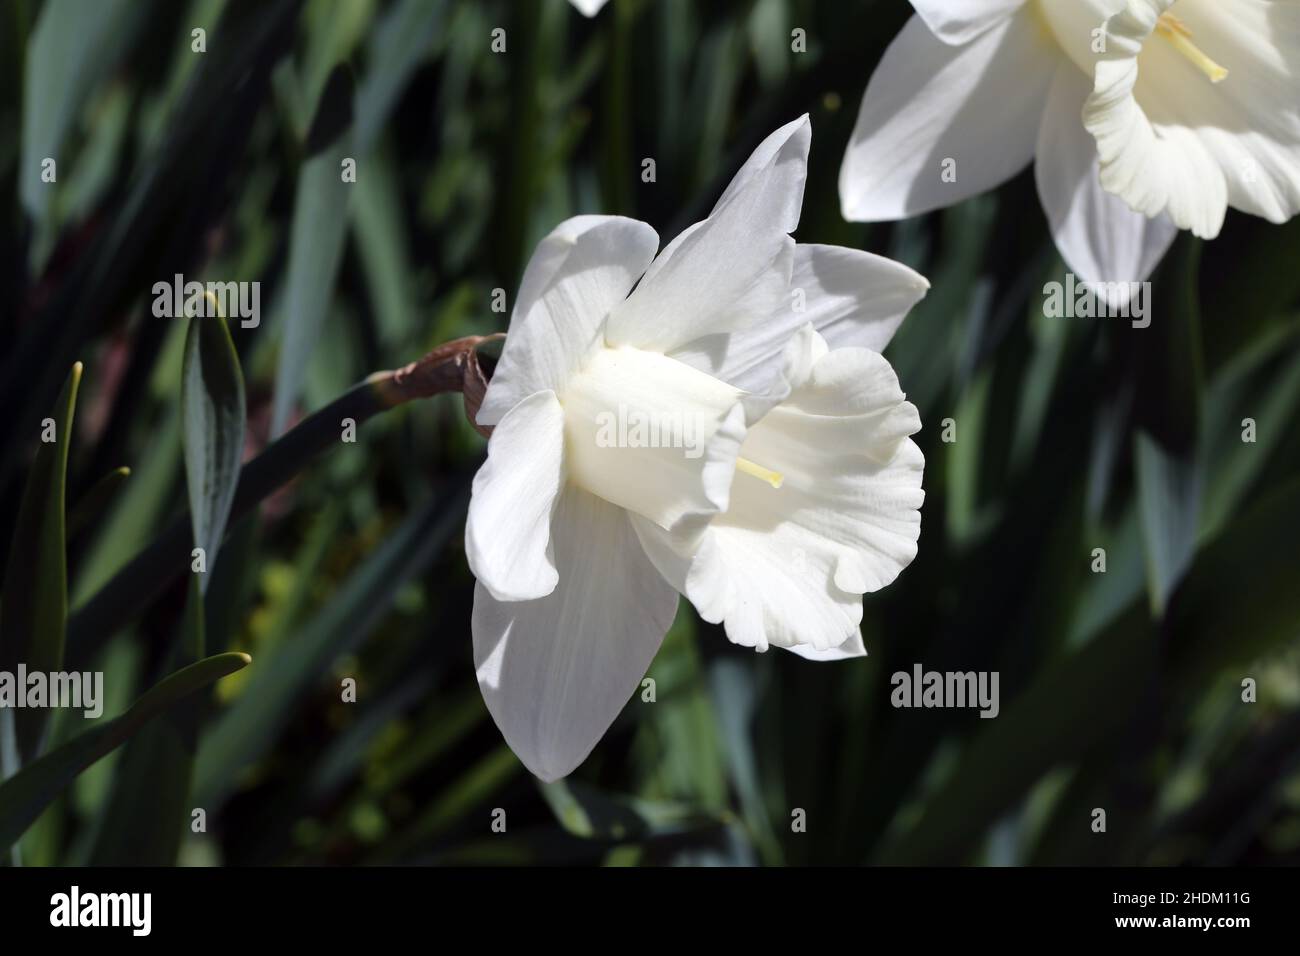 White trumpet daffodils - beautiful spring flower that belongs to amaryllis family. Often used in gardens and as a decoration during Easter time. Stock Photo